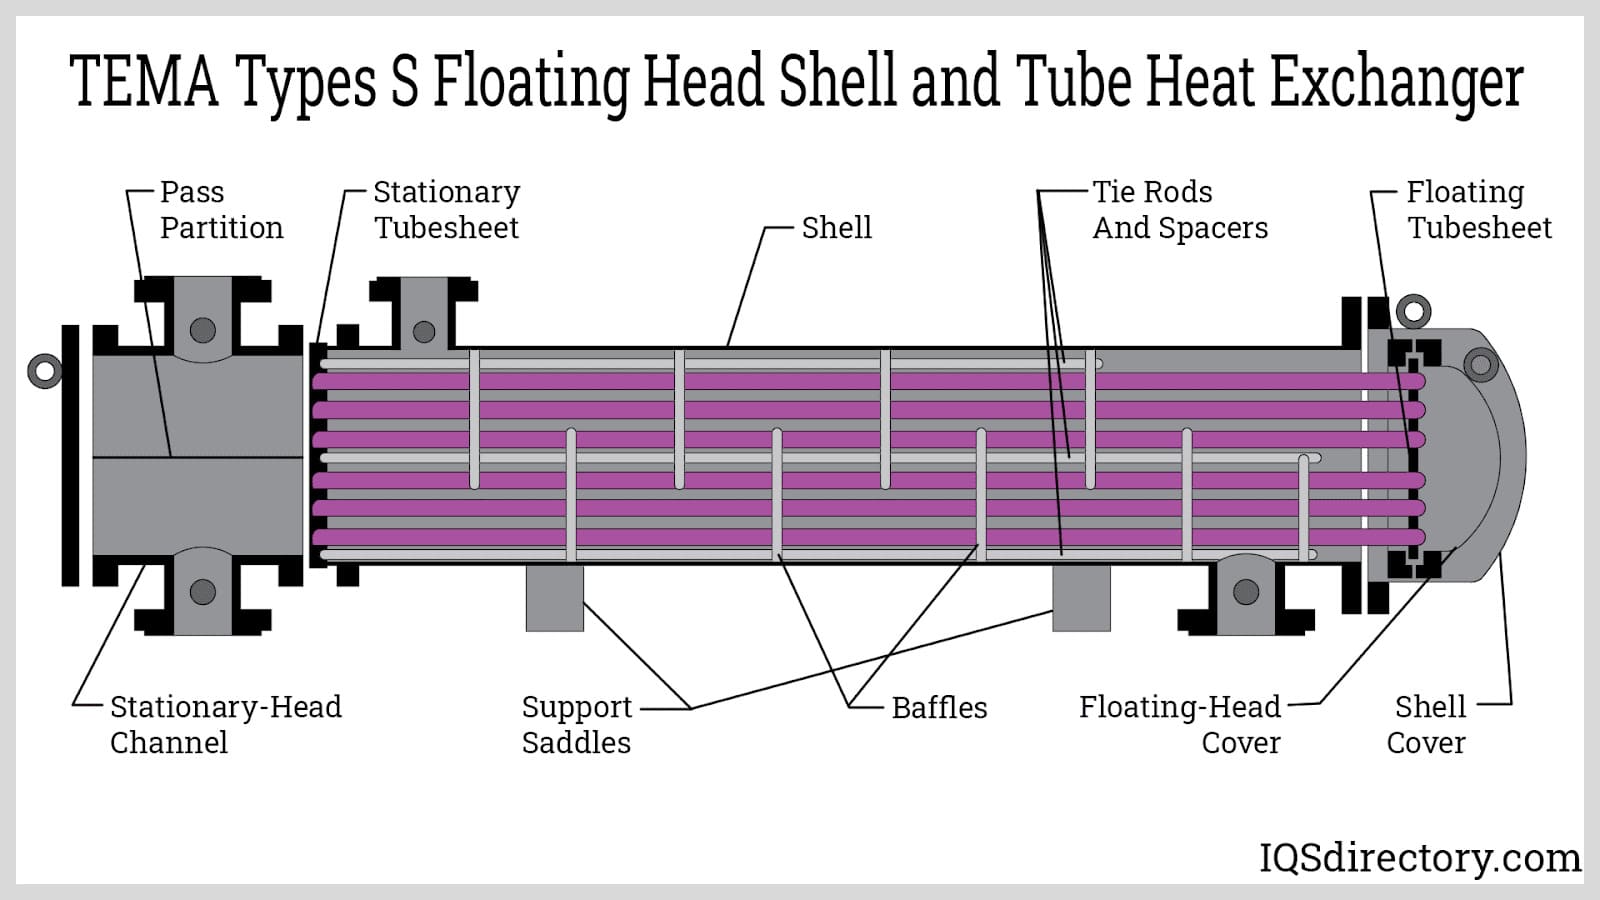 TEMA Types S Floating Head Shell and Tube Heat Exchanger